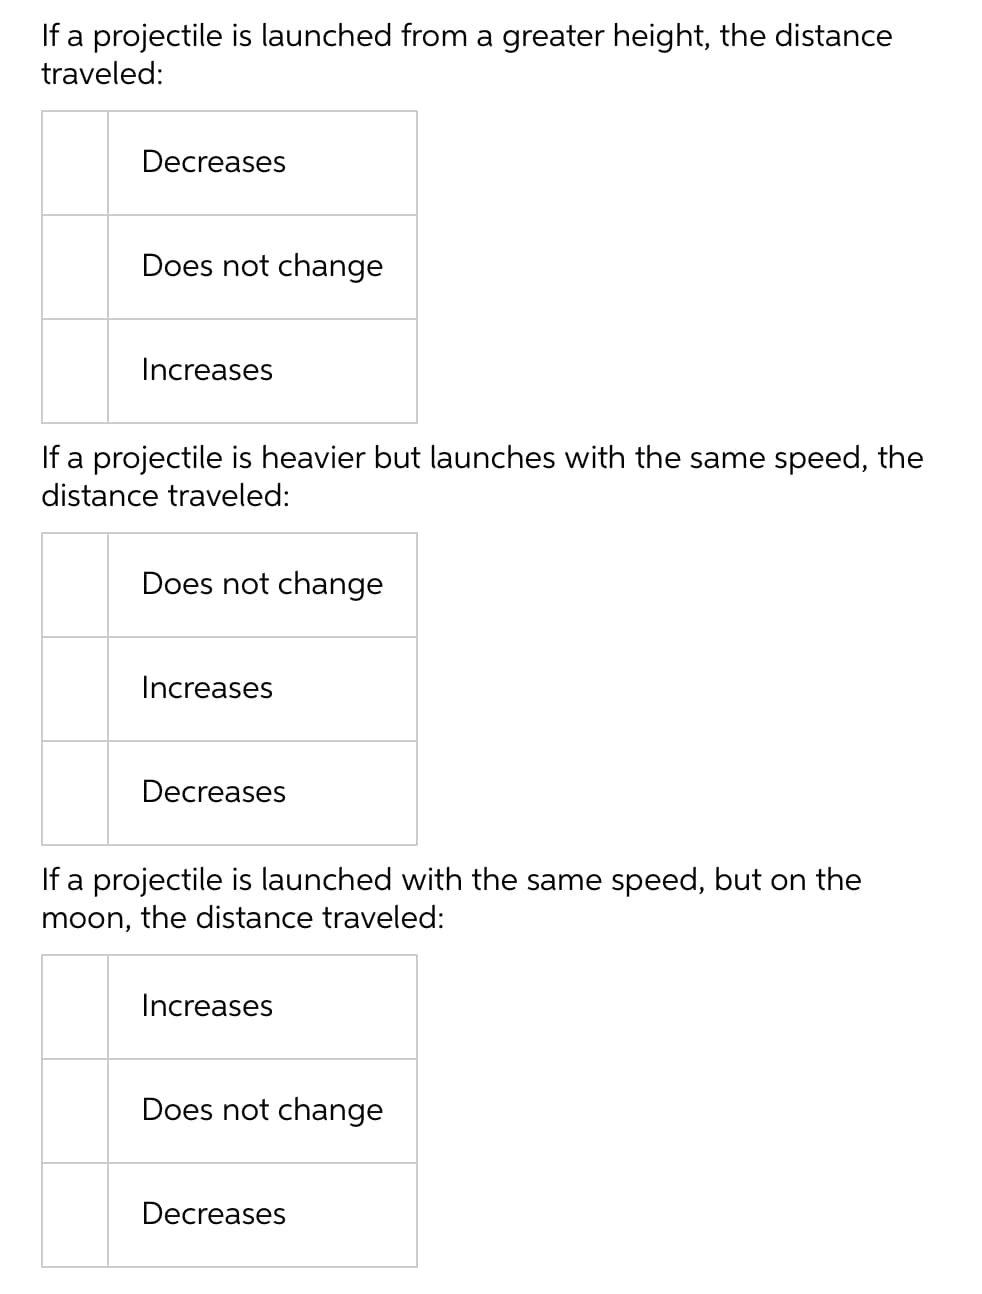 If a projectile is launched from a greater height, the distance
traveled:
Decreases
Does not change
Increases
If a projectile is heavier but launches with the same speed, the
distance traveled:
Does not change
Increases
Decreases
If a projectile is launched with the same speed, but on the
moon, the distance traveled:
Increases
Does not change
Decreases
